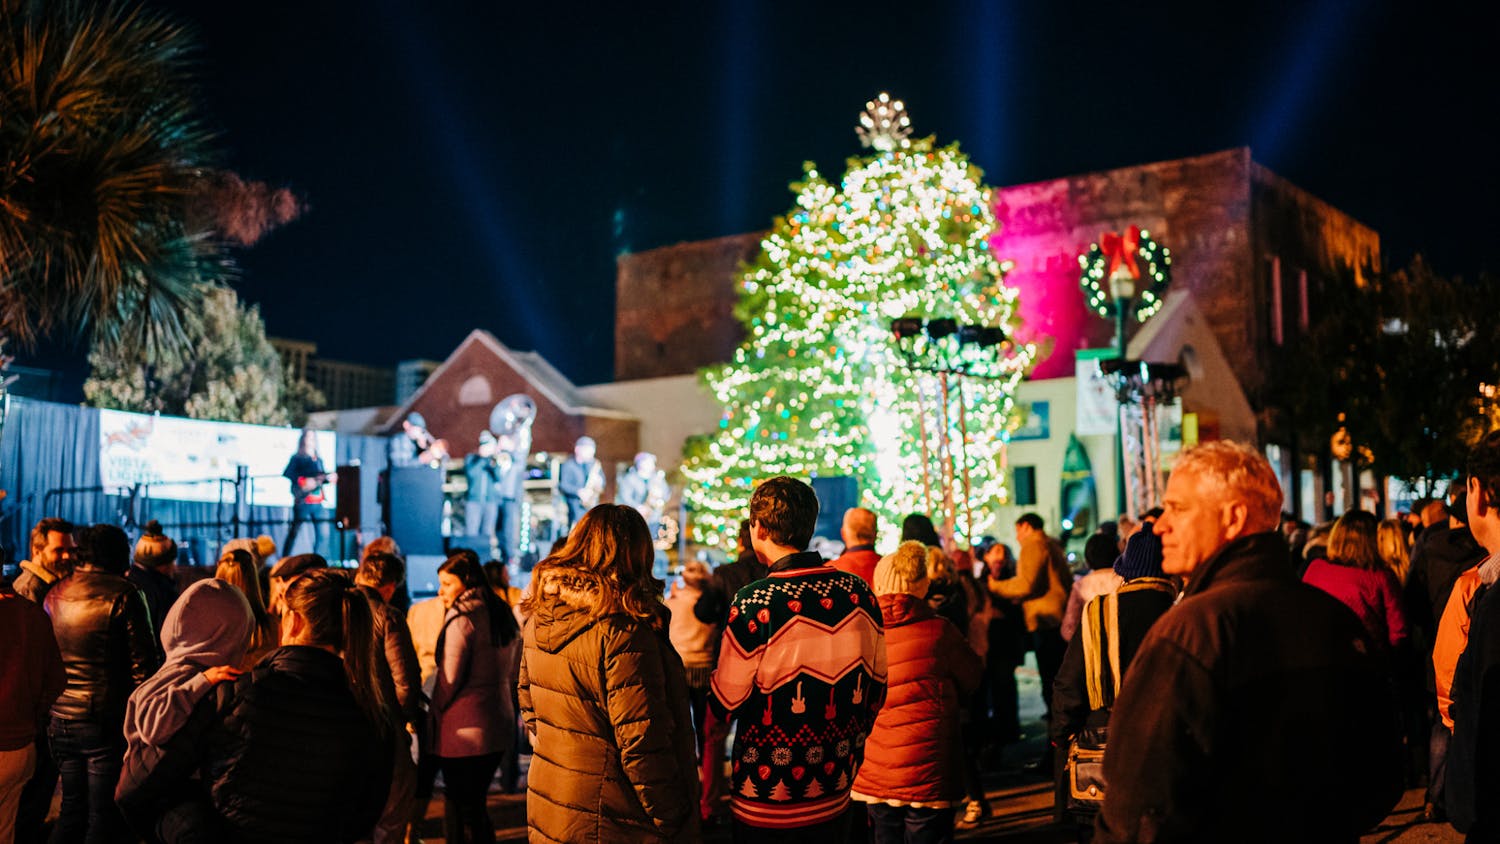 Crowds fill the street at the annual Vista Lights event in November 2022. The event is put together by the Congaree Vista Guild, a membership-based nonprofit organization dedicated to promoting the Vista.